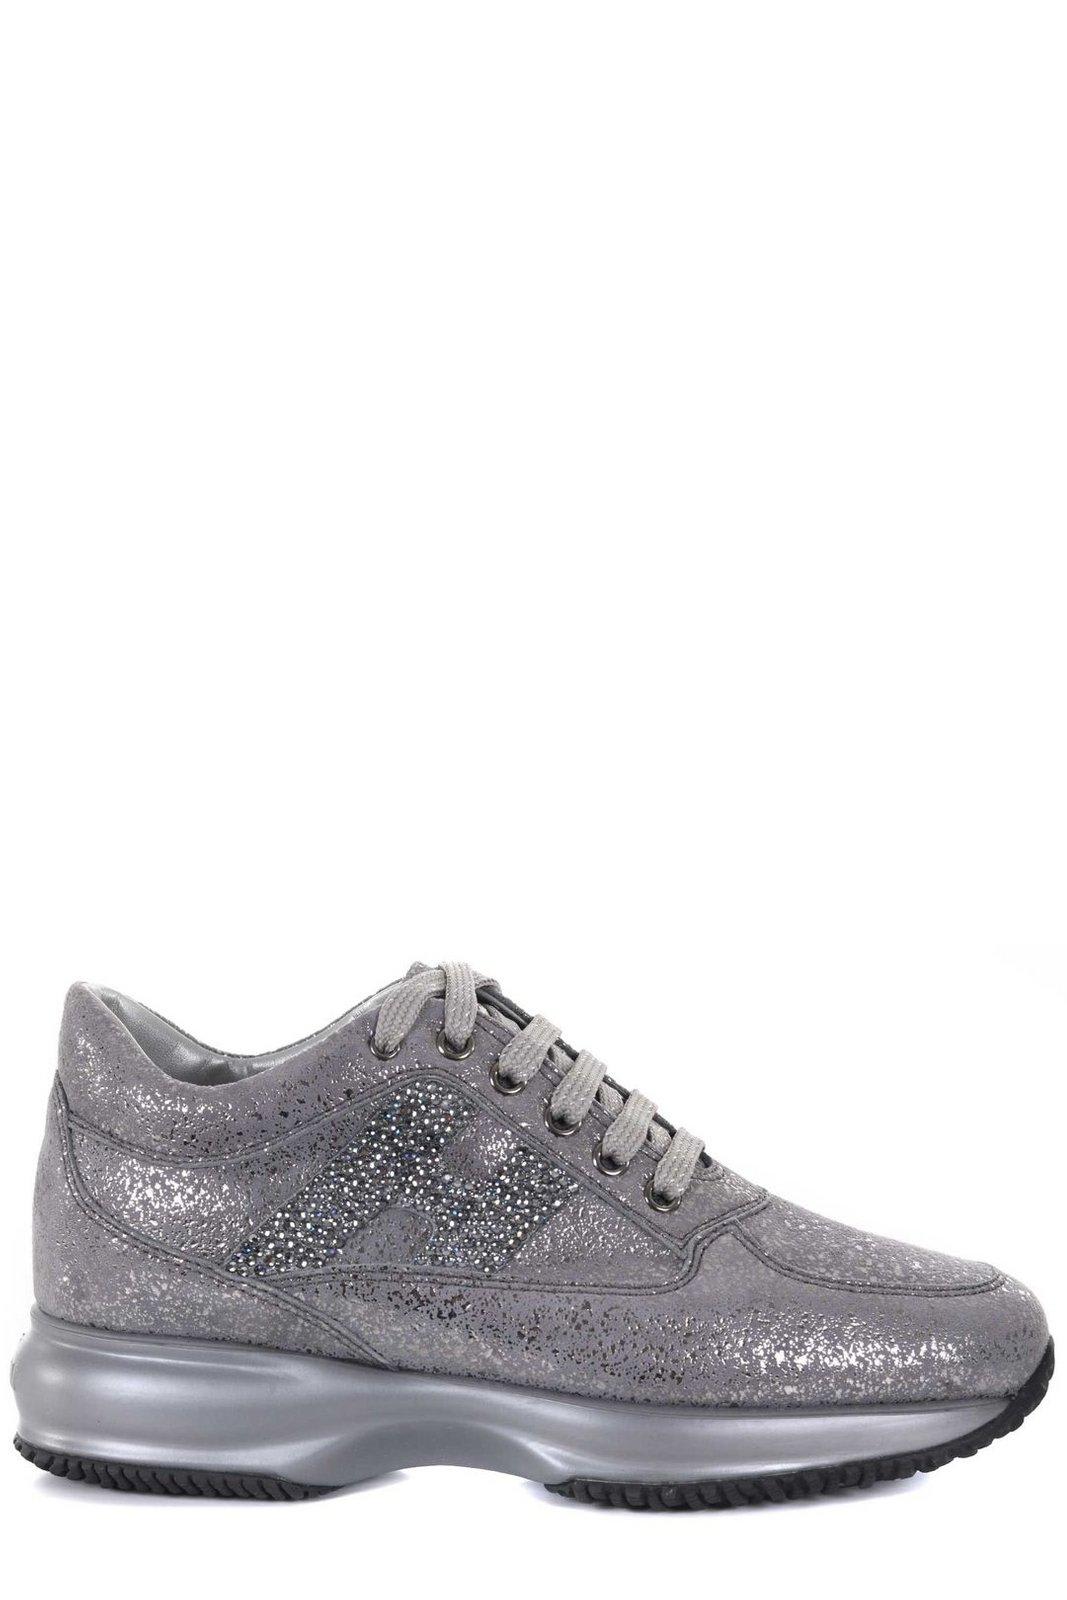 Hogan Interactive Rhinestone Embellished Lace-up Sneakers